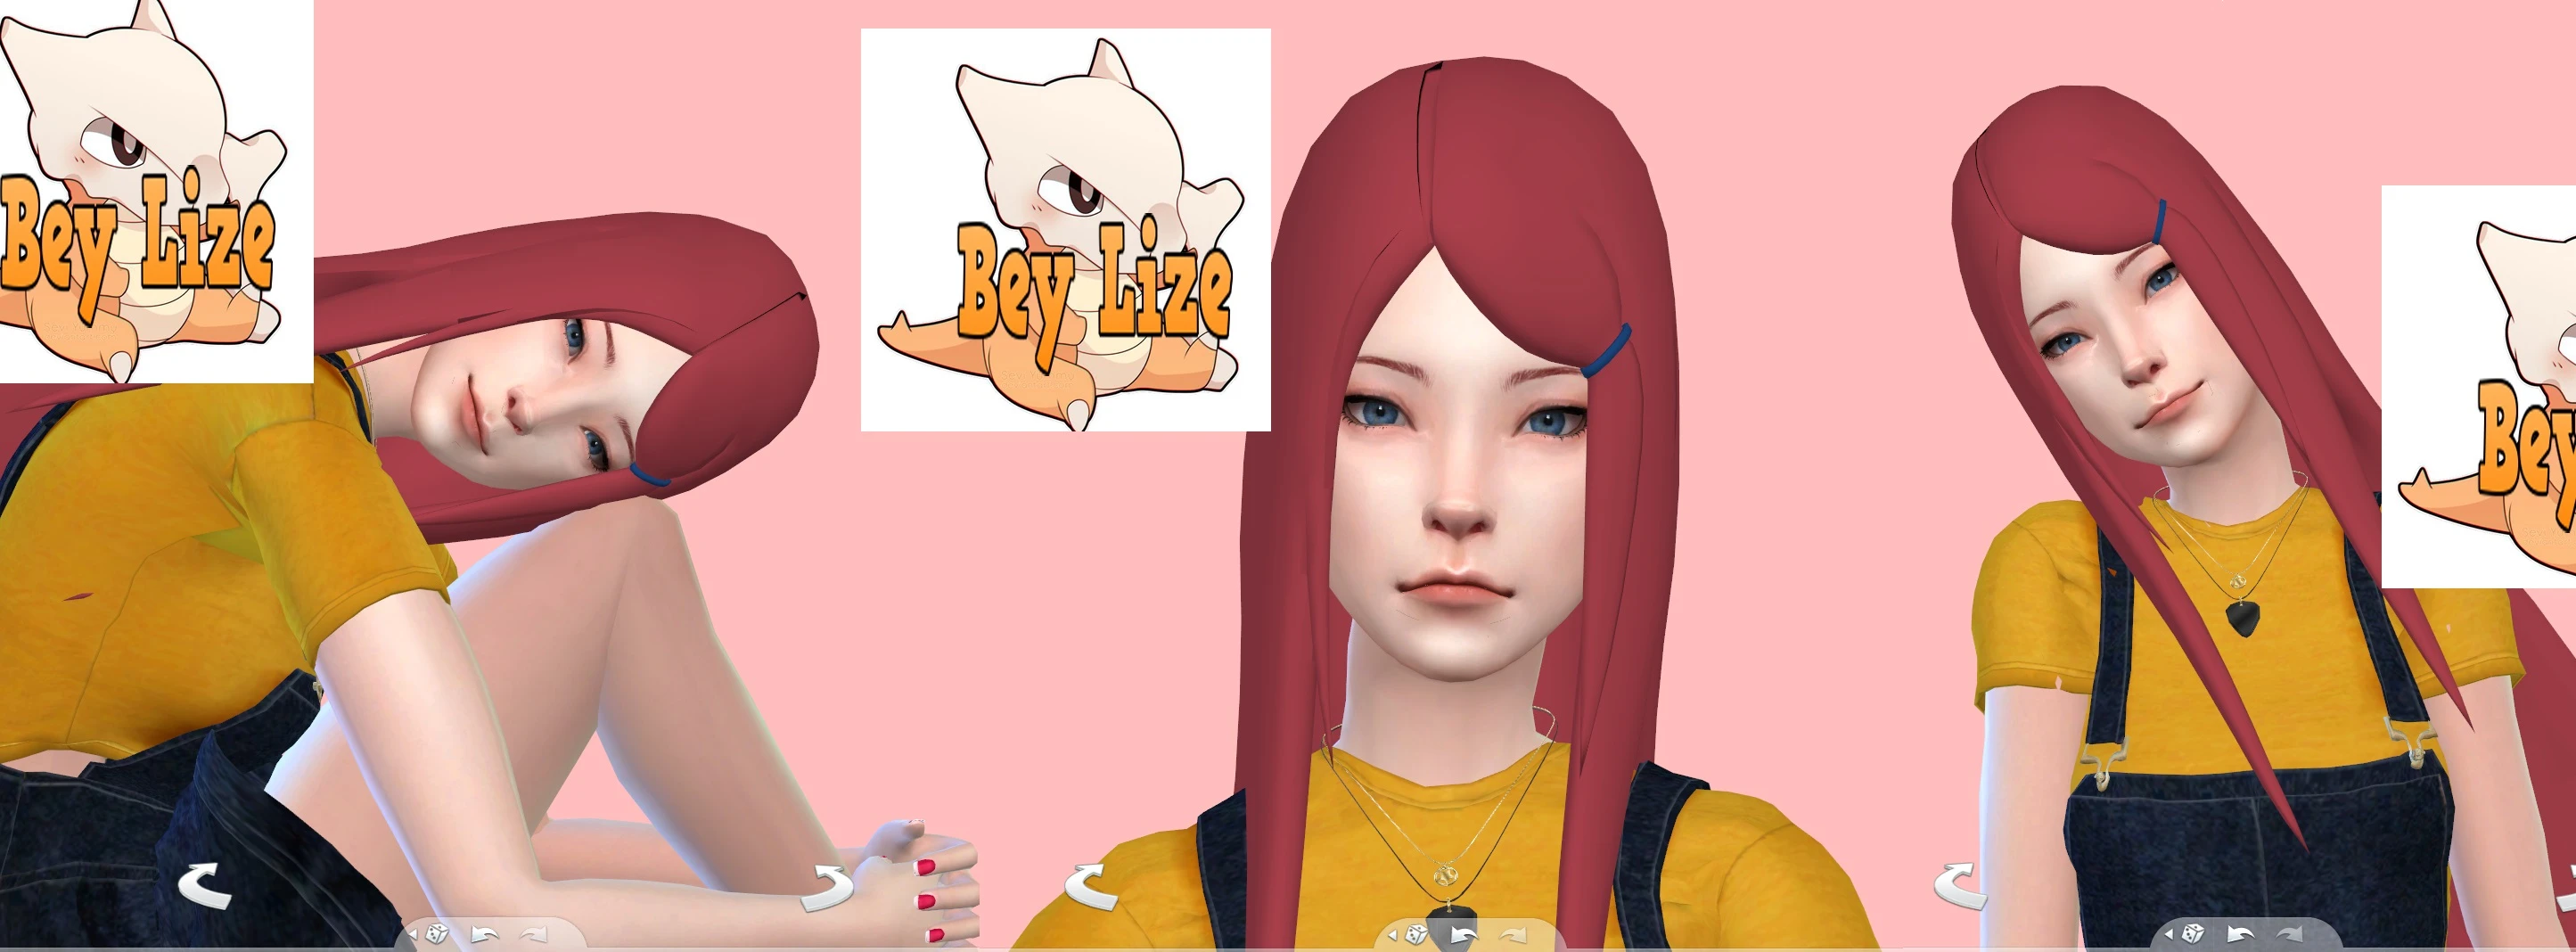 The sim 3 and The sim 4 Anime Mods - Gray hair by Natalia-Auditore  https://www.patreon.com/posts/20363505 | Facebook